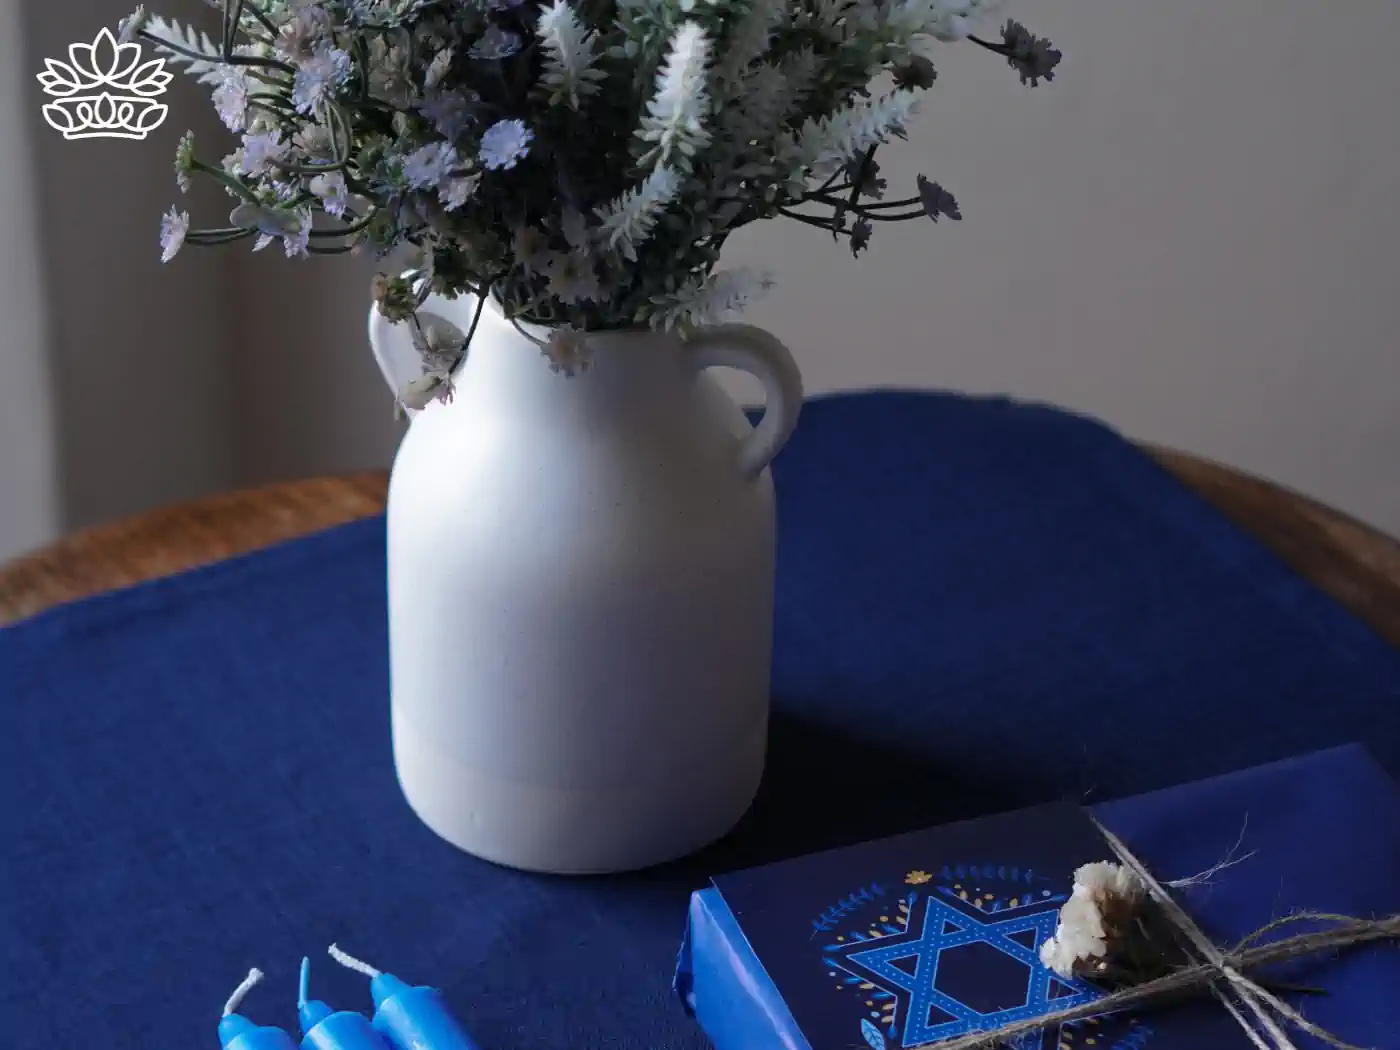 A white ceramic vase filled with delicate purple and white flowers, sitting on a blue cloth alongside Hanukkah candles and a wrapped gift. Fabulous Flowers and Gifts - Hanukkah Flowers.